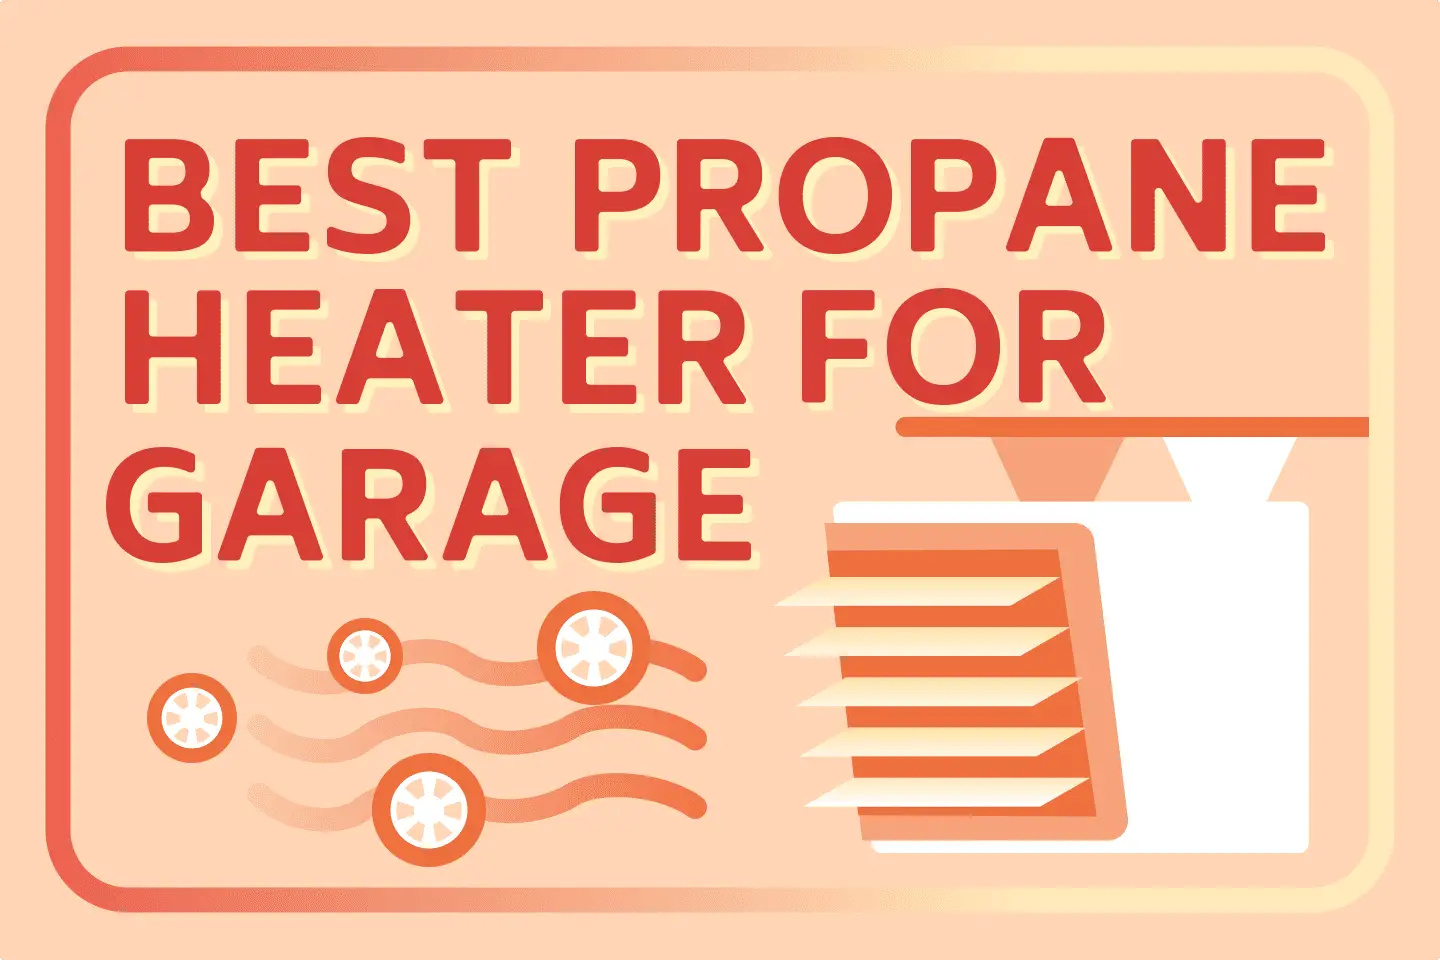 4 Best Propane Heaters for Garage [Full Buying Guide]